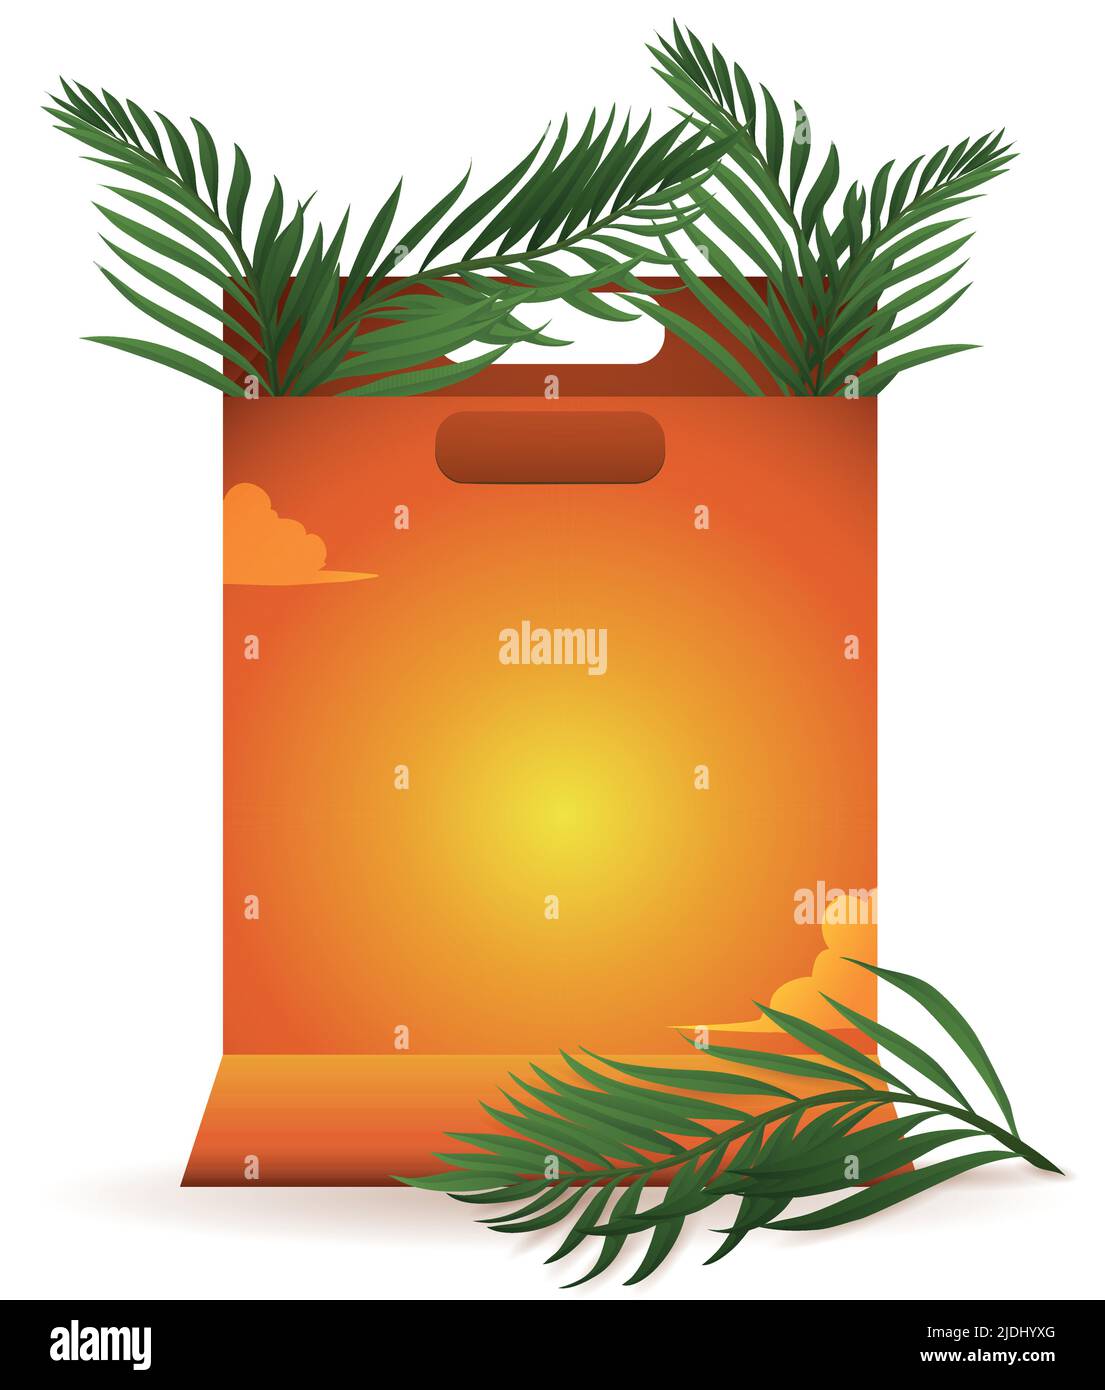 Beautiful shopping bag with orange sunset design and some palm leaves to decorate it. Stock Vector